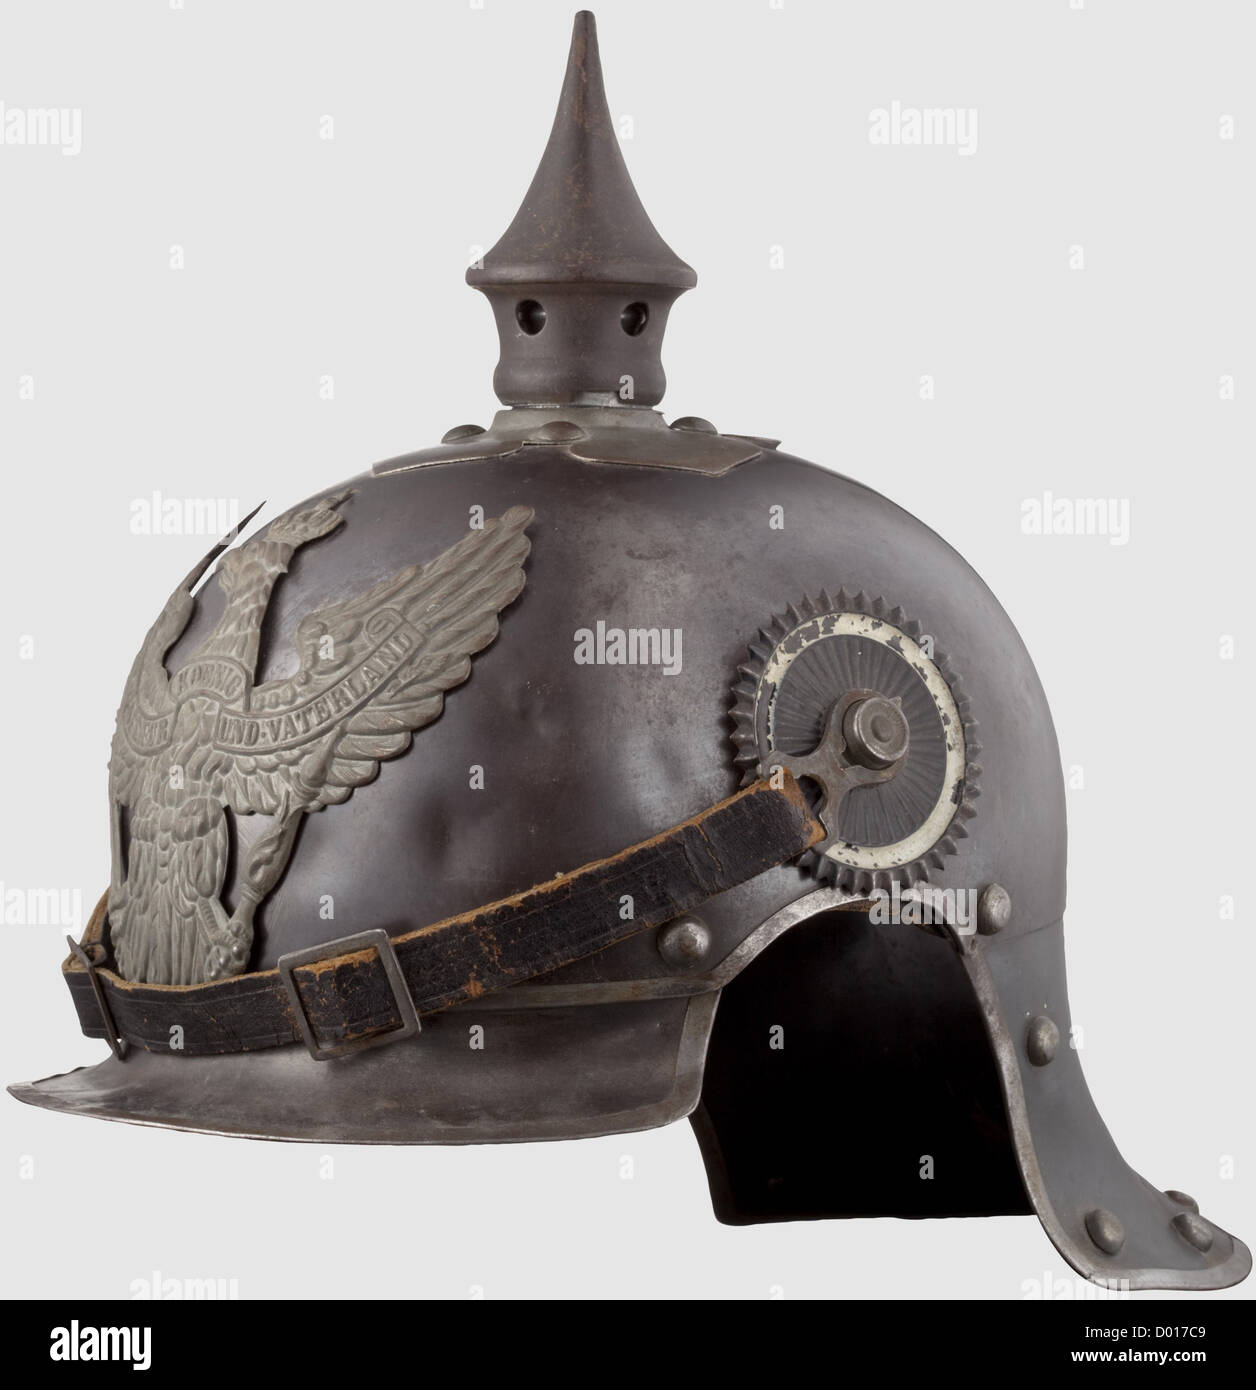 A model 1915 helmet for enlisted men,Blued steel skull with bright metal trim and rivets. Field grey spike on a bayonet mount. Field grey dragoon eagle. Leather chinstraps on '91' buttons. Enlisted men's cockades. Leather lining. The maker's inscription 'Weissenburger & Cie Cannstatt' is inside at the top,historic,historical,1910s,20th century,Prussian,Prussia,German,Germany,militaria,military,object,objects,stills,clipping,clippings,cut out,cut-out,cut-outs,helmet,helmets,headgear,headgears,protection,protective,uniform,uniforms,ute,Additional-Rights-Clearences-Not Available Stock Photo